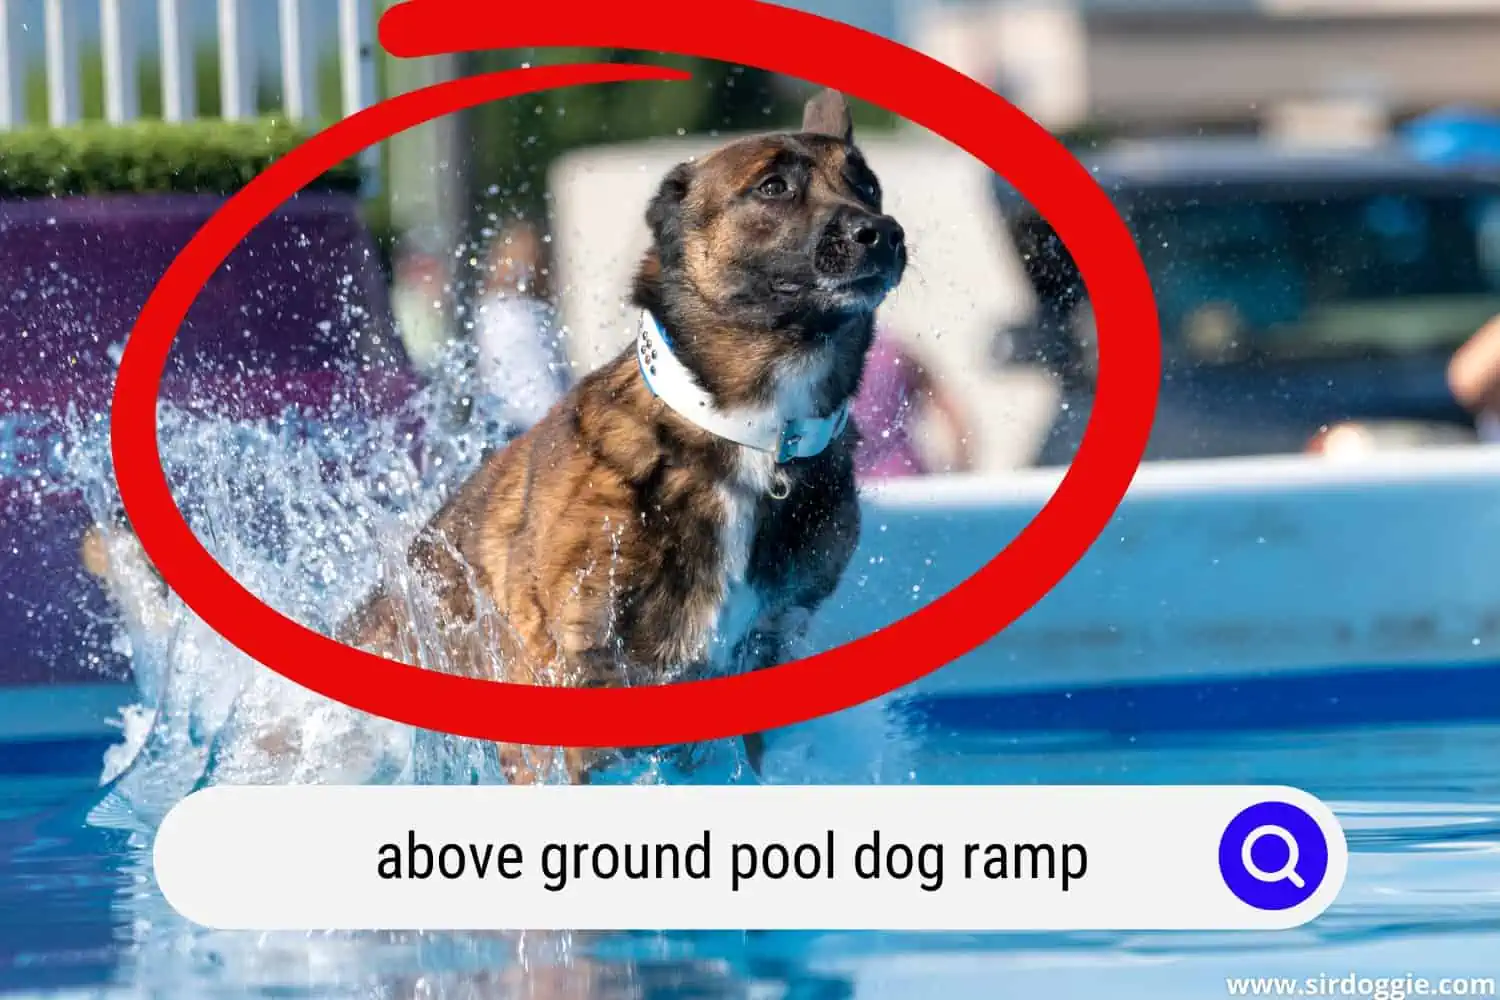 A dog standing in above the ground pool ramp